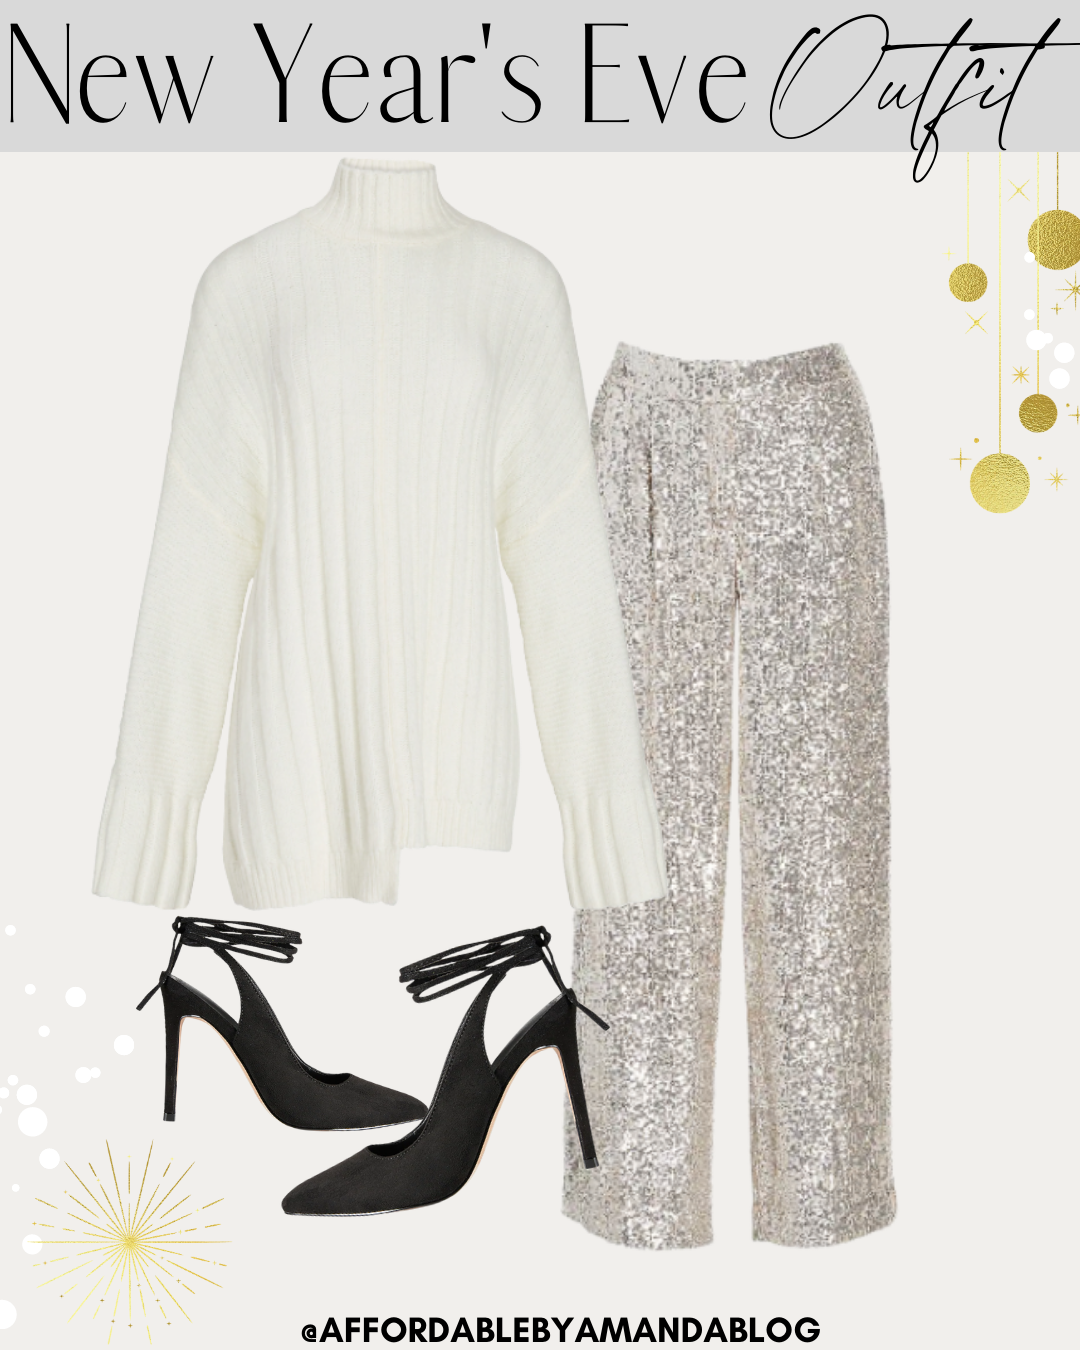 New Year's Eve Outfit Ideas 2020 | Affordable by Amanda